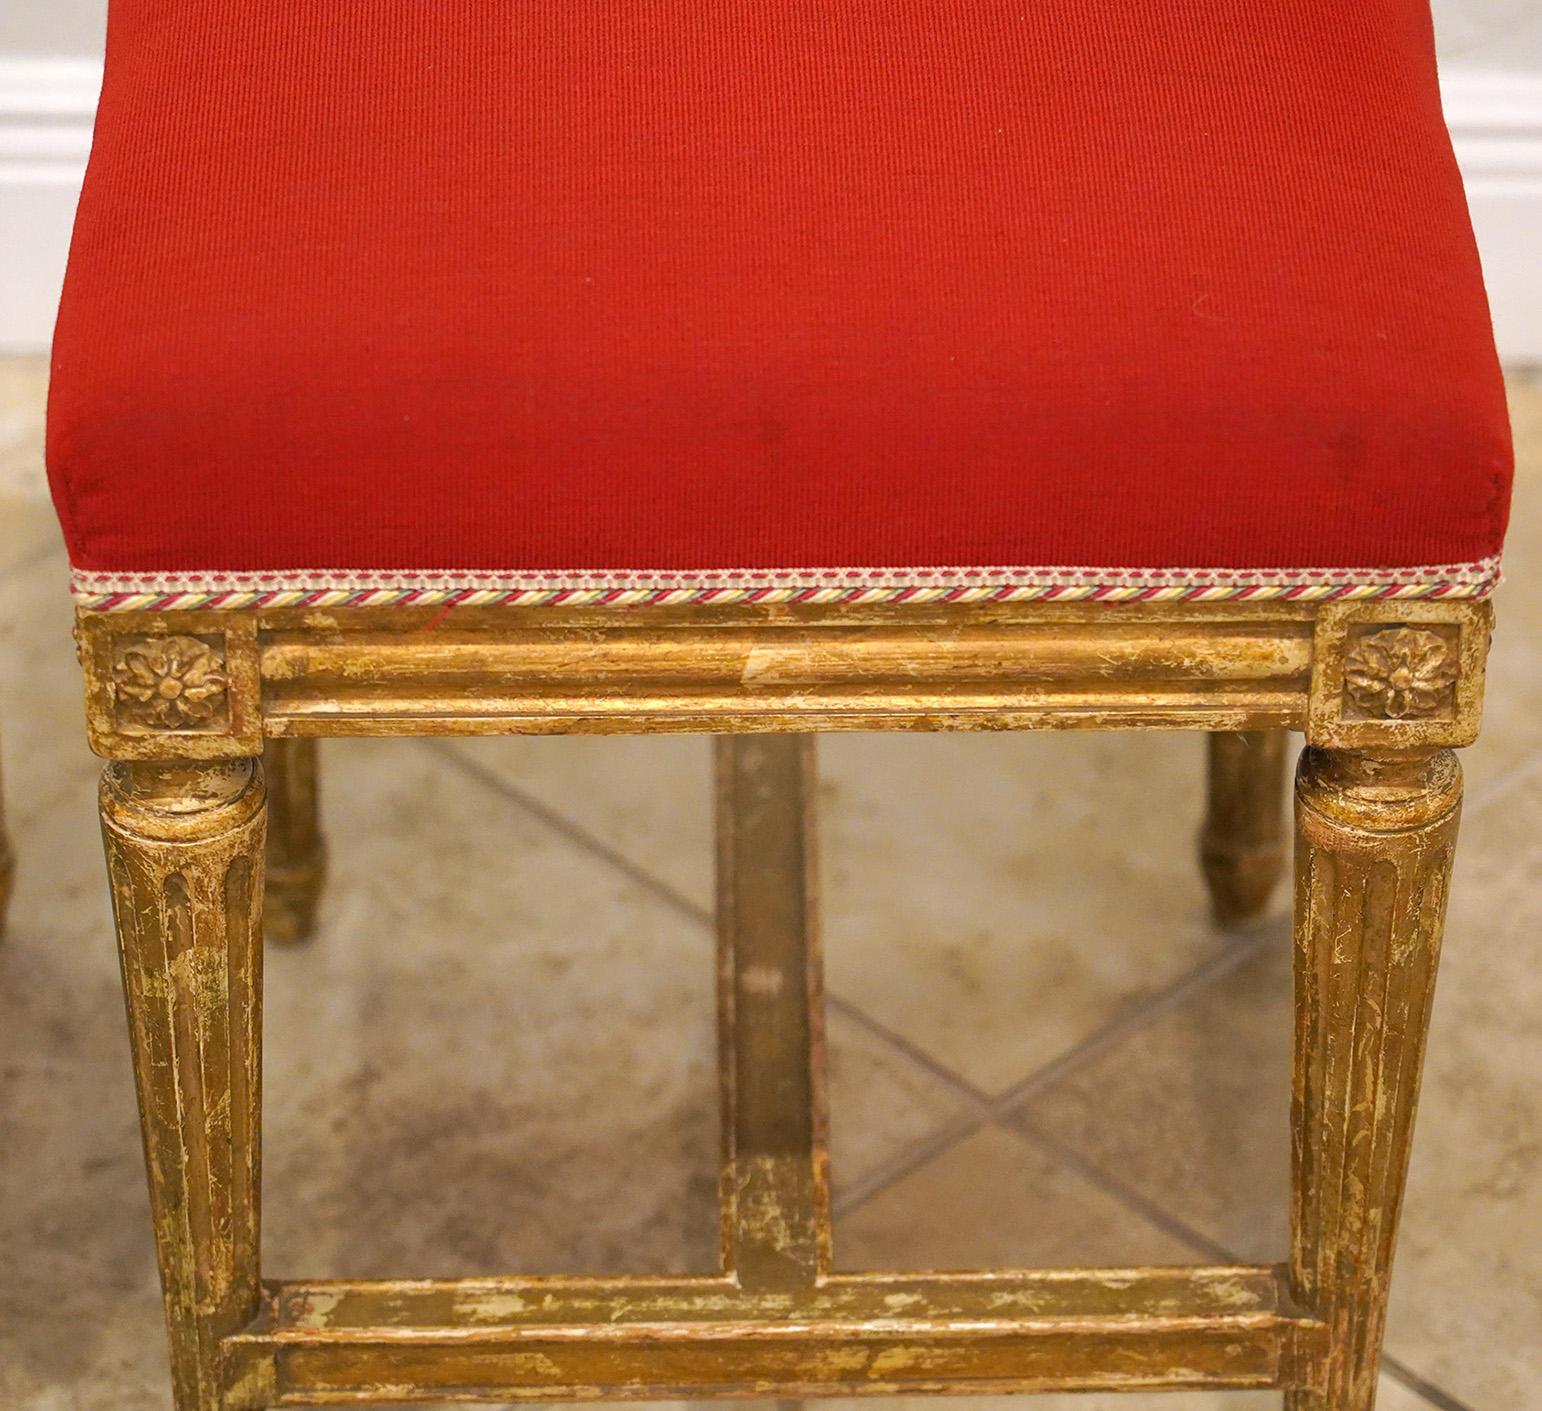 20th Century Pair of French Louis XVI Style Paint and Gilt Upholstered Benches or Stools